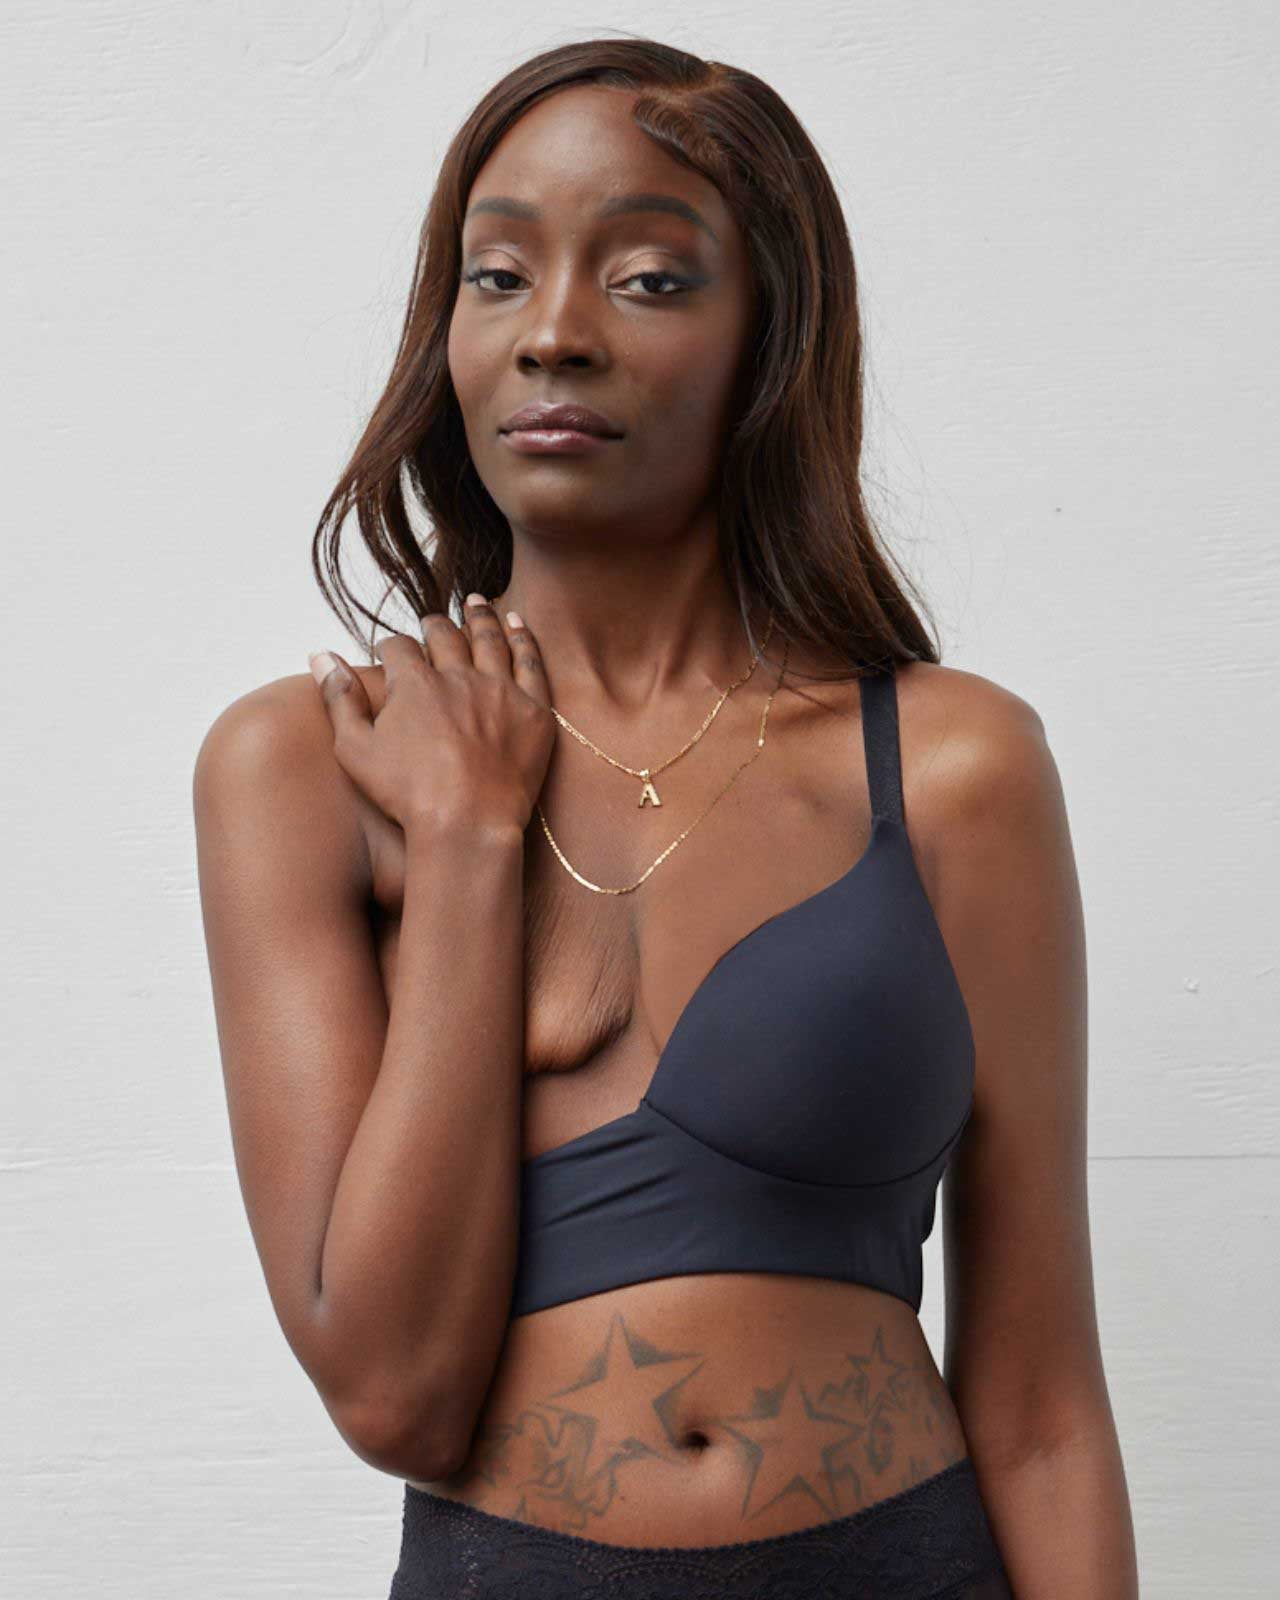 How to Make Sewing Patterns - This Bust Sling Bra was made by